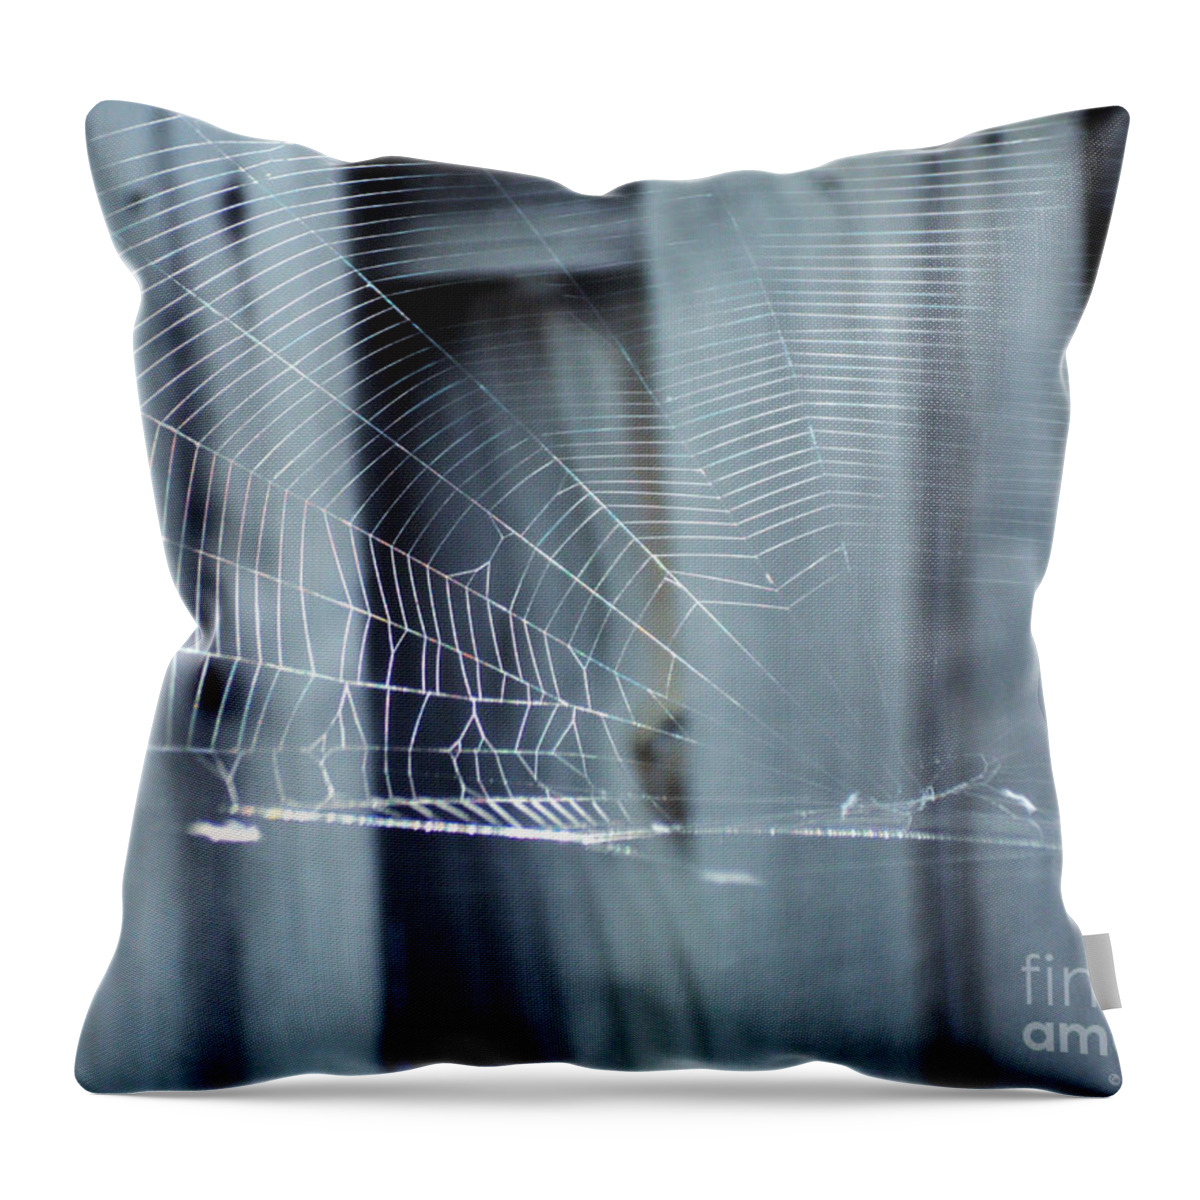 Cobwebs Throw Pillow featuring the photograph Spider Web by Megan Dirsa-DuBois